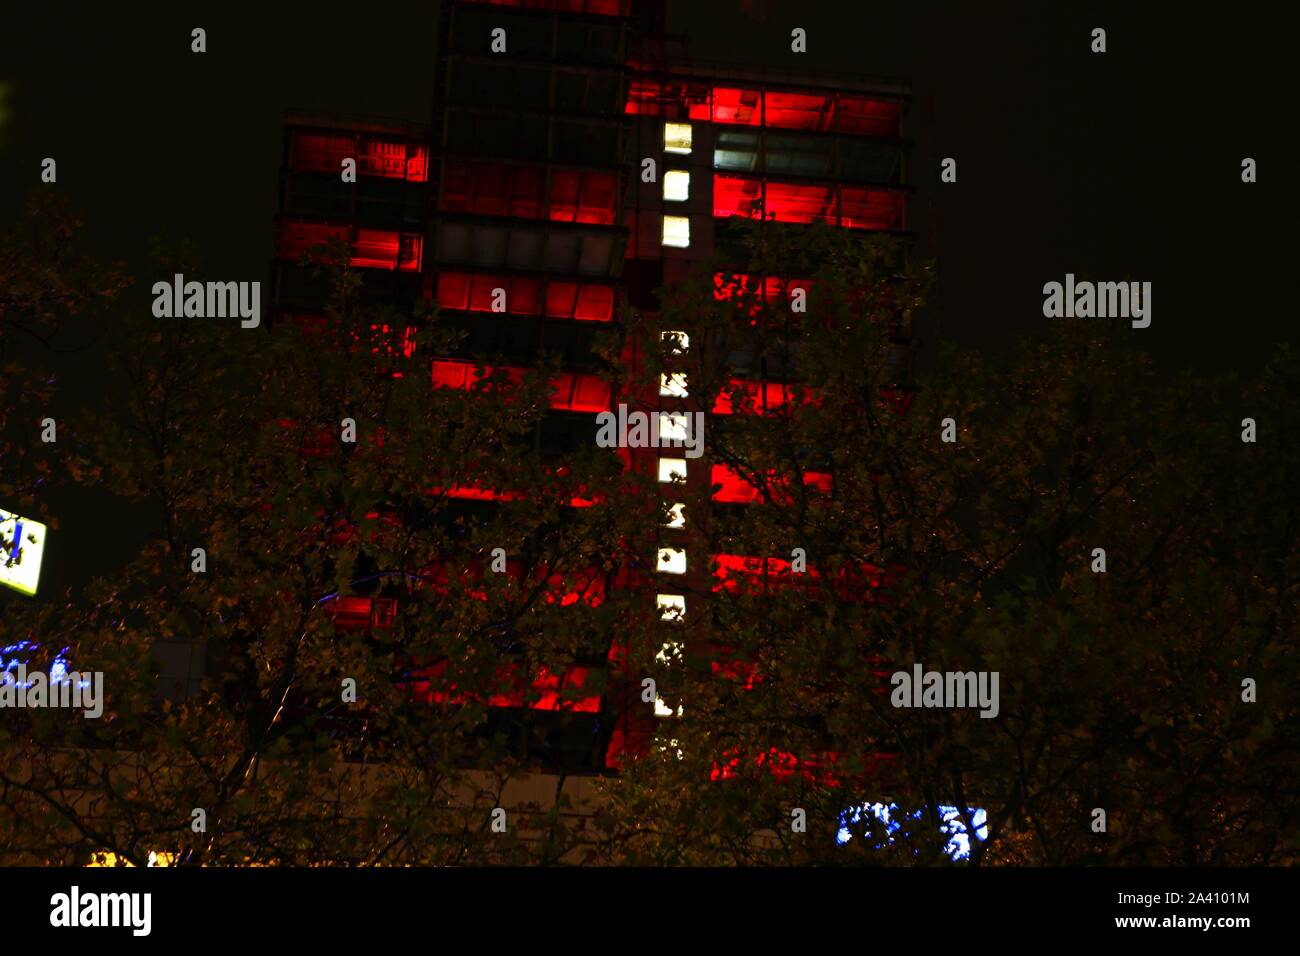 Berlin, Germany. 10th Oct, 2019. The light festival 'Berlin lights' has begun. It is under the motto 'Light changes' this year. Artists from all over the world illuminate different places and buildings in the city with colorful colors - including the Steglitzer Kreisel. At the Berlin Festival, light artists are setting spectacular pictures of buildings in the city with light and projections. The photo shows the Steglitzer spinning top illuminated in color in the evening. (Photo by Simone Kuhlmey/Pacific Press) Credit: Pacific Press Agency/Alamy Live News Stock Photo